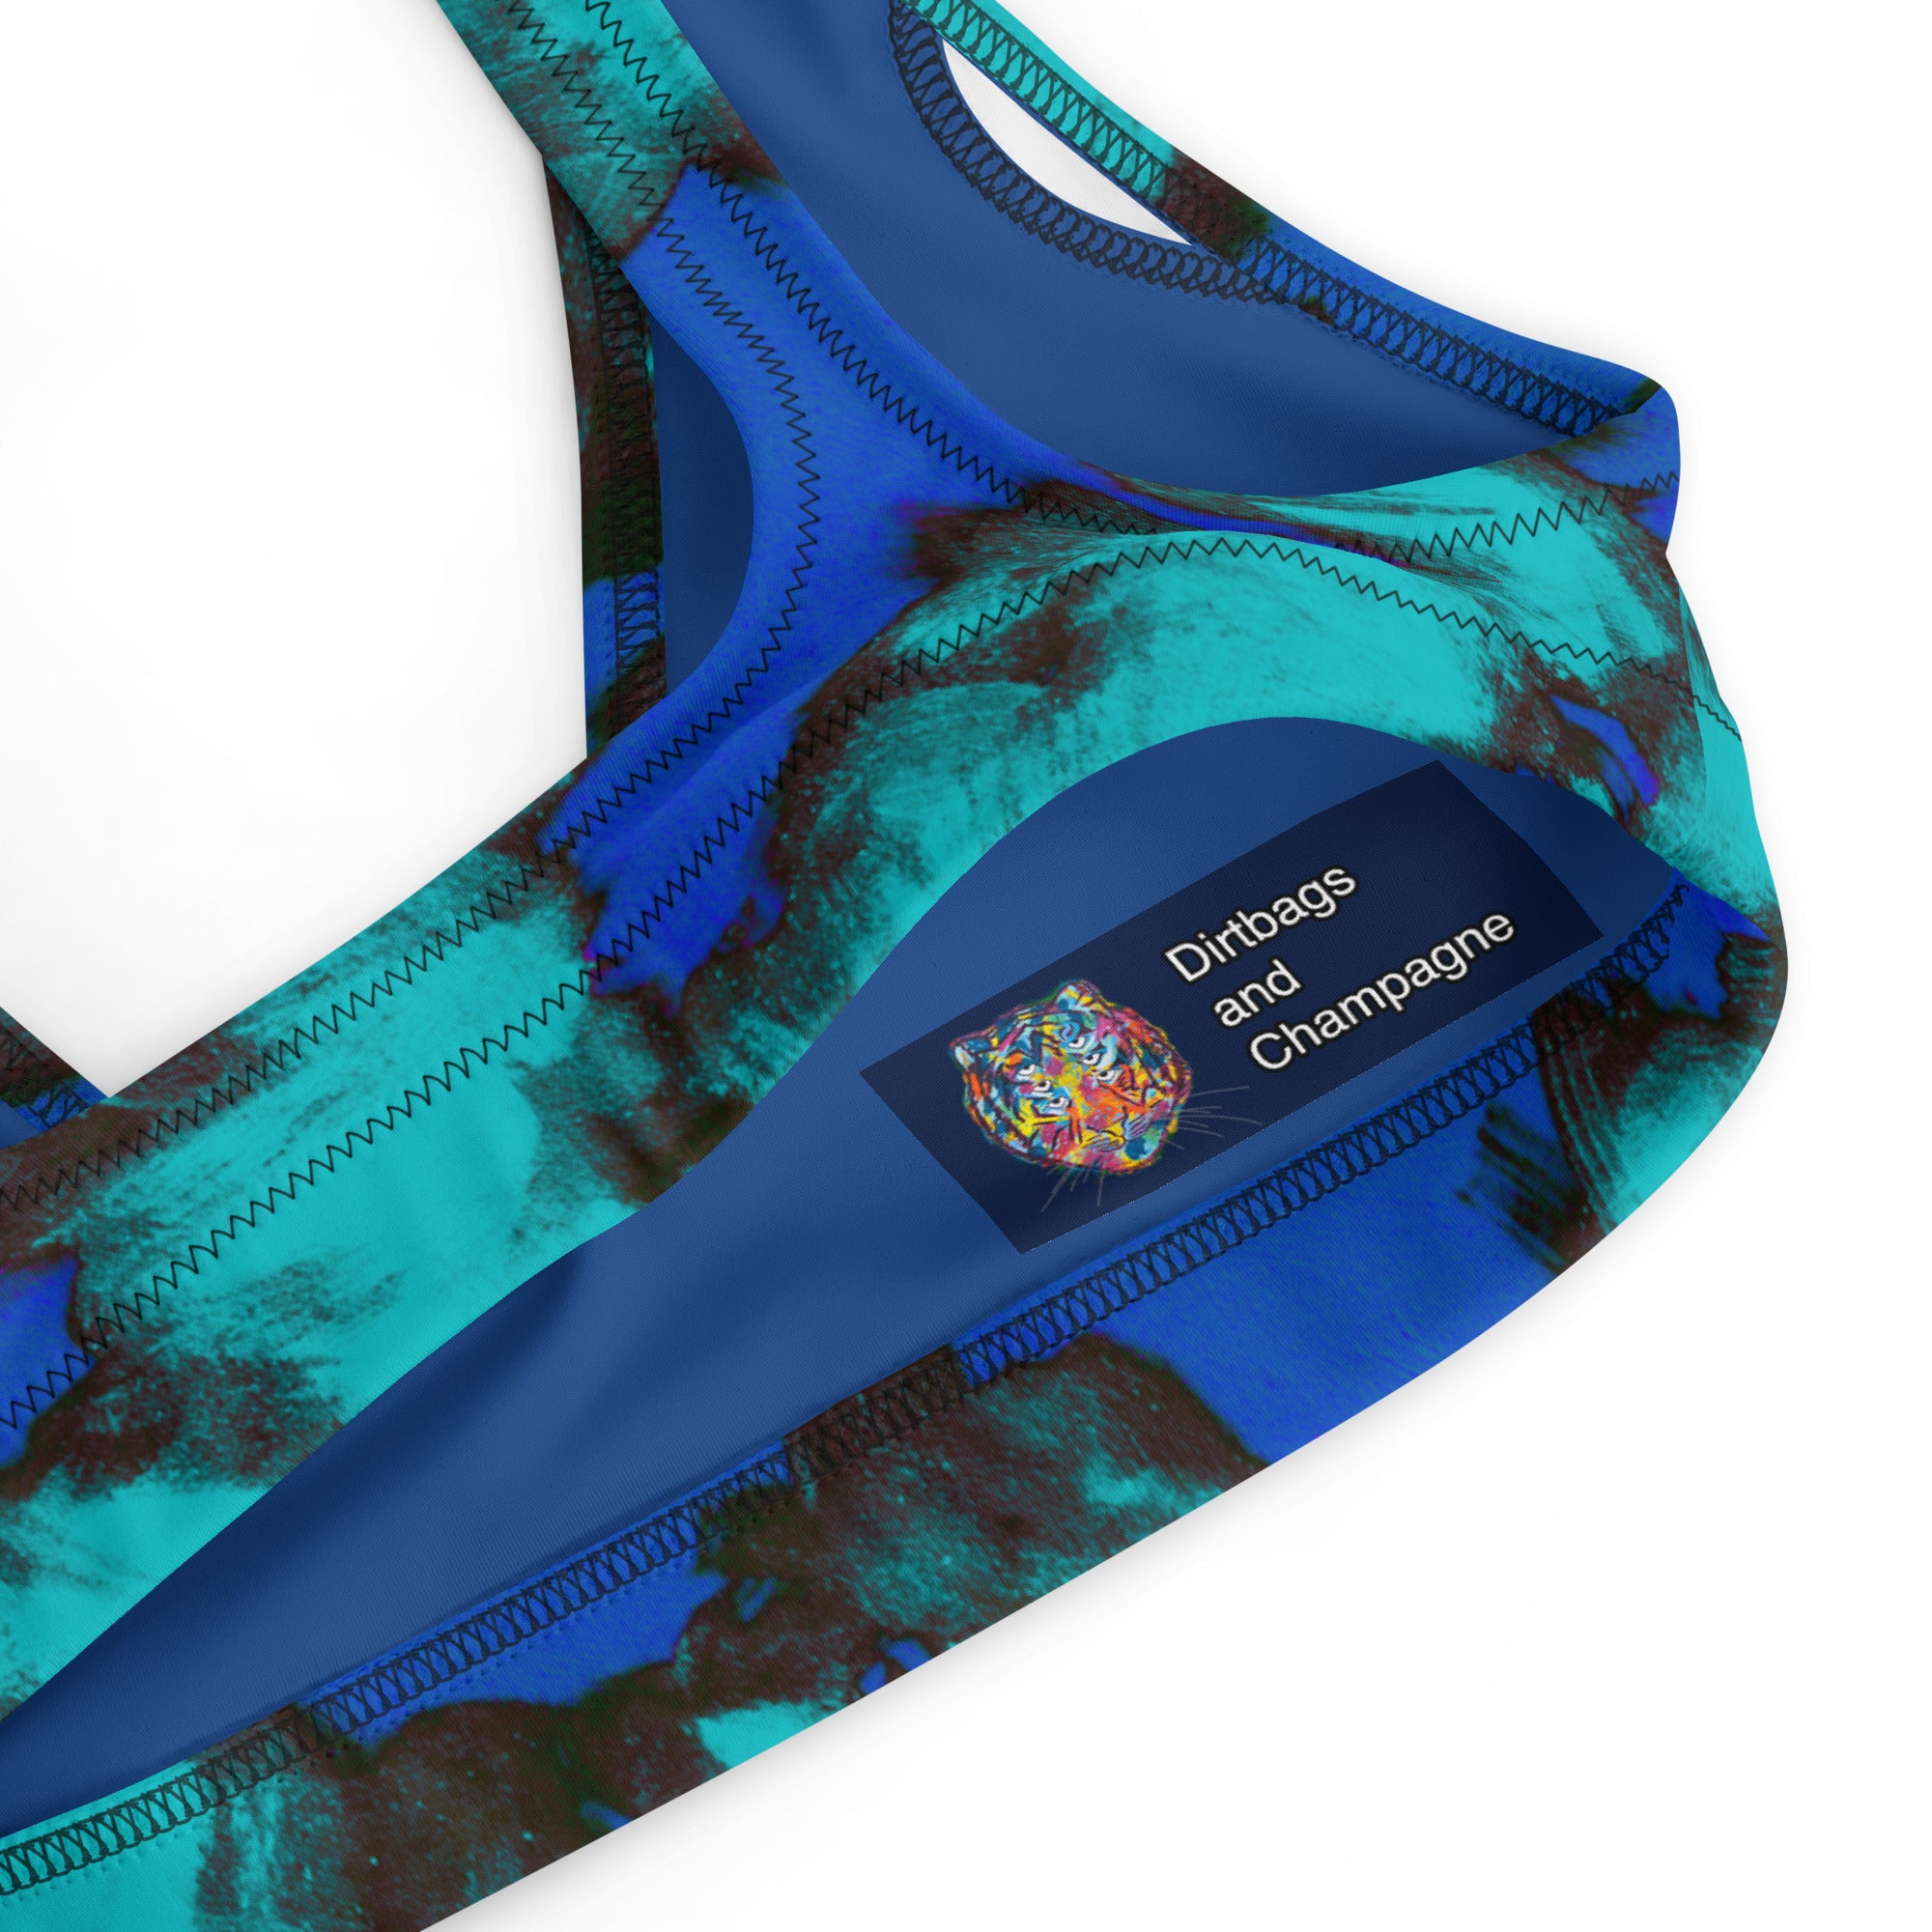 Blue and teal painted Recycled padded bikini top